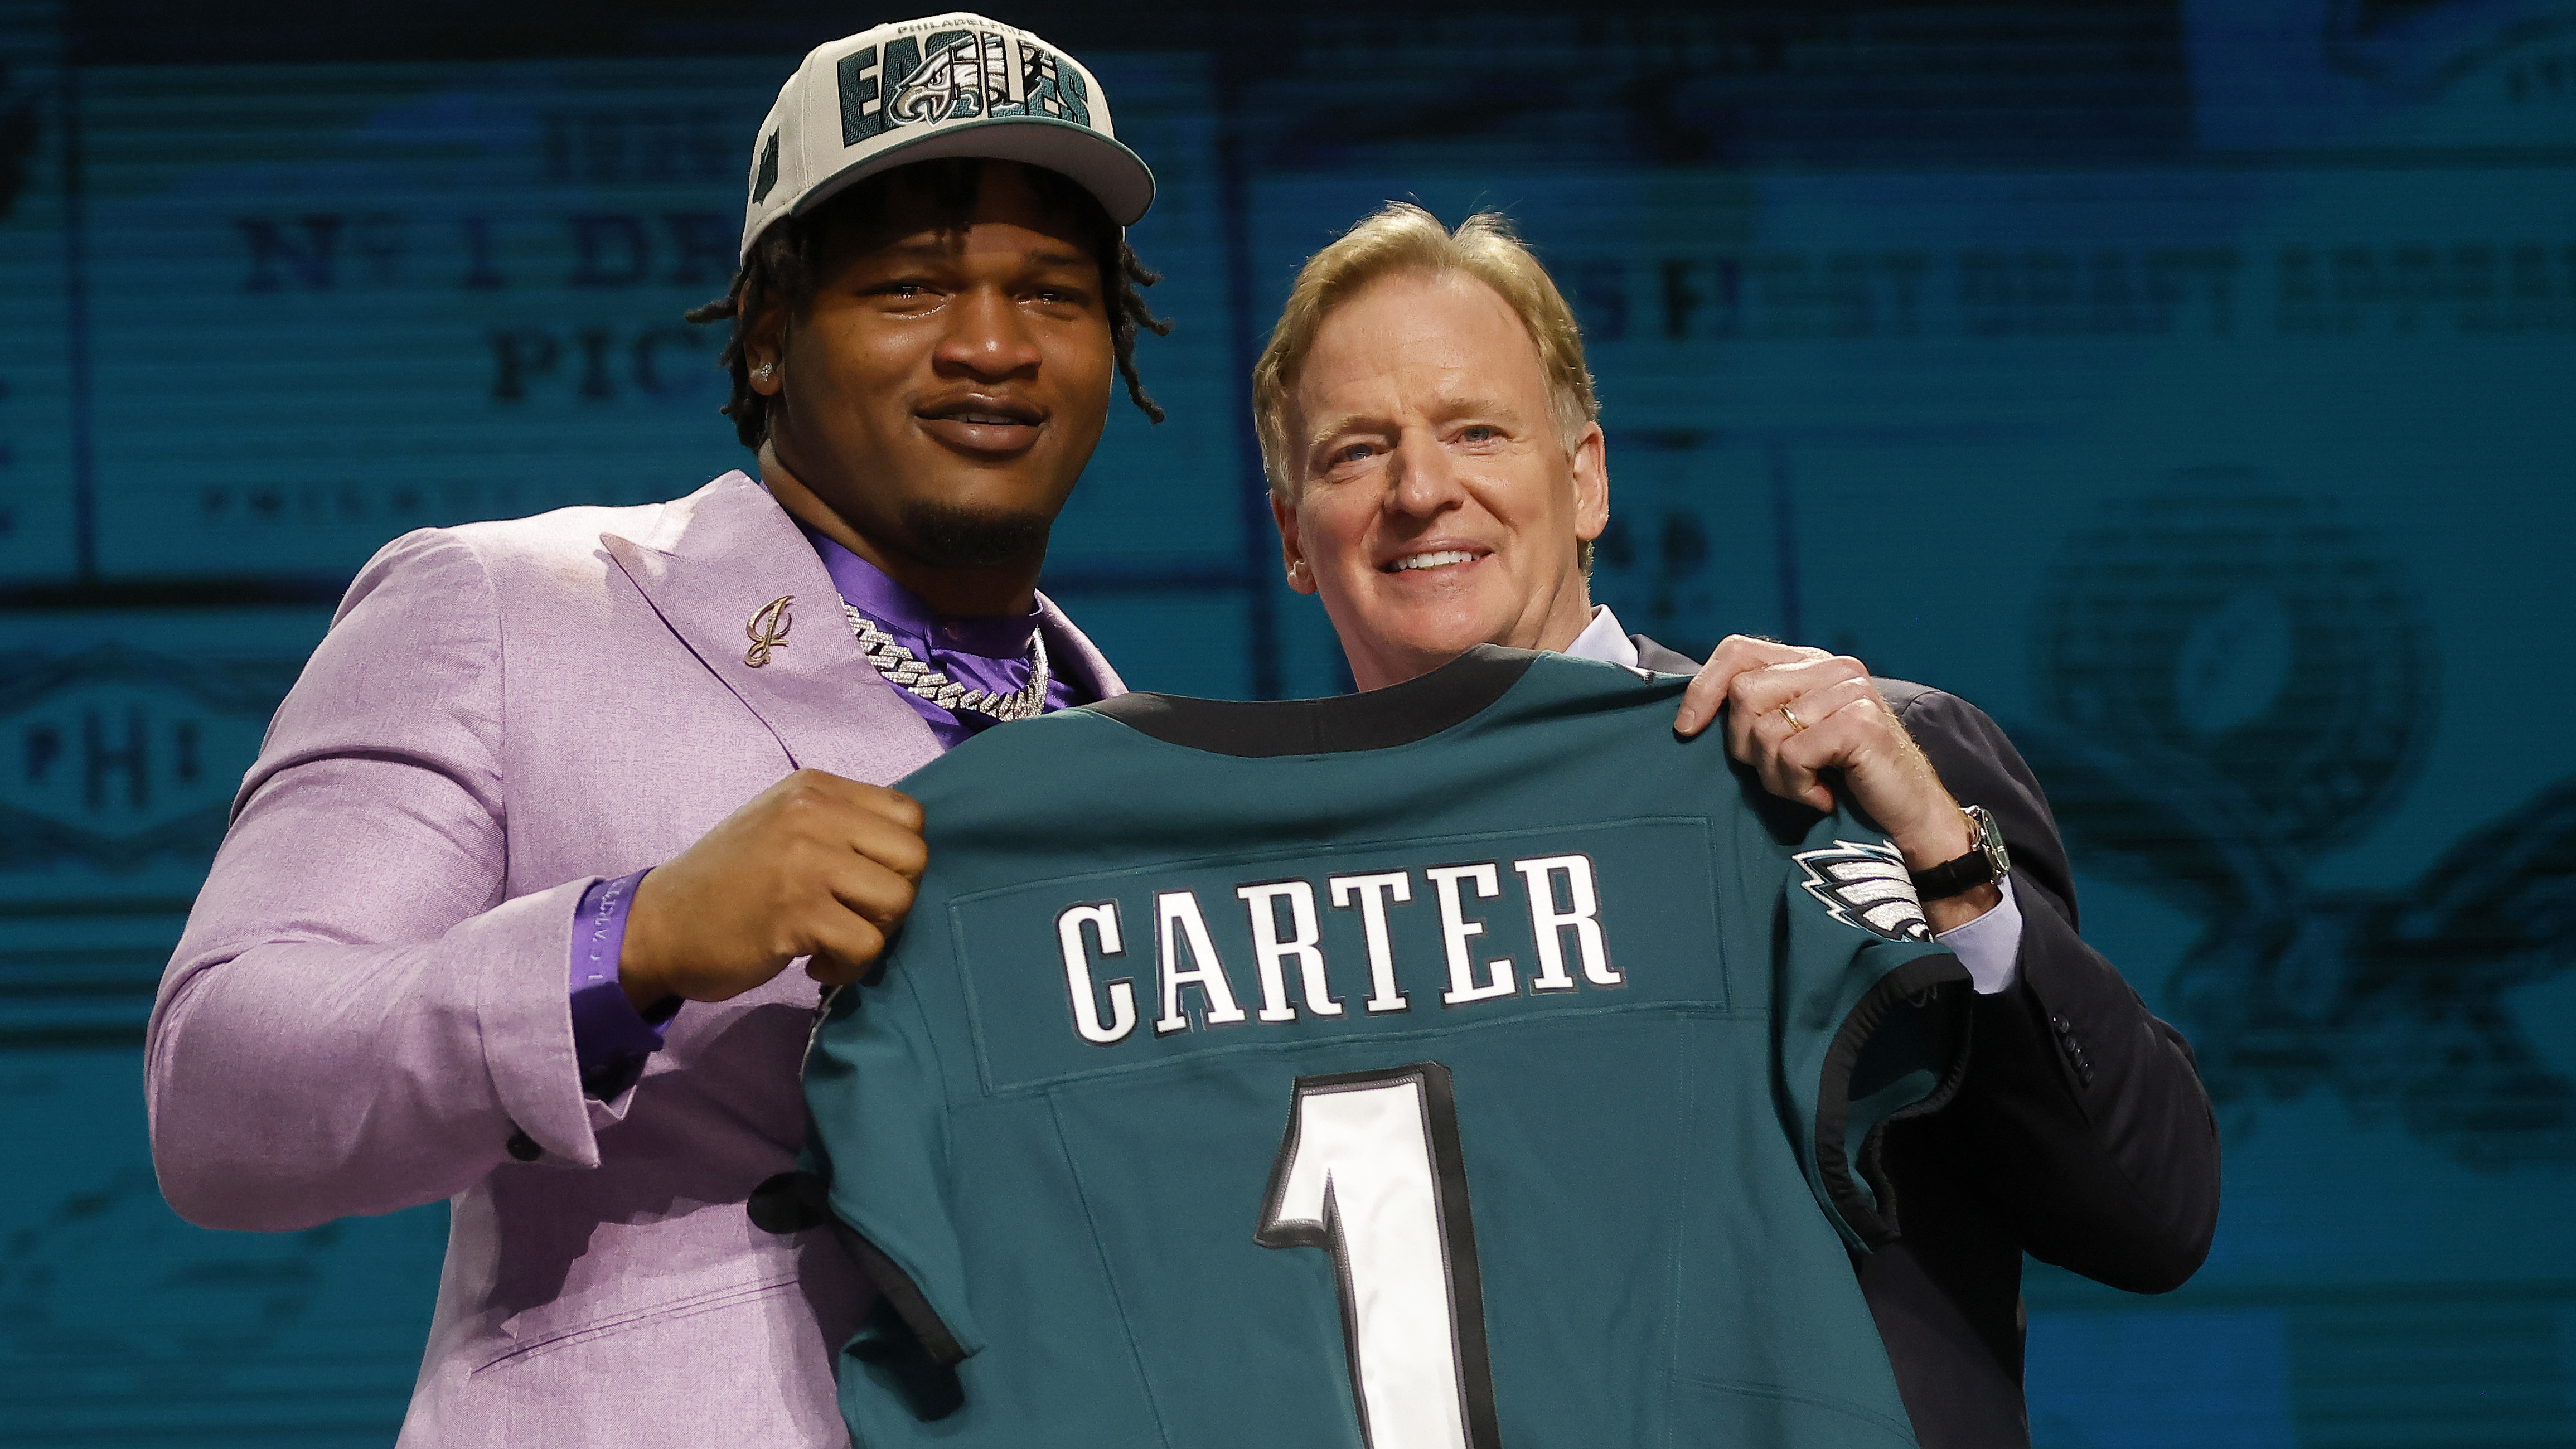 Jalen Carter from Georgia after being drafted by the Eagles